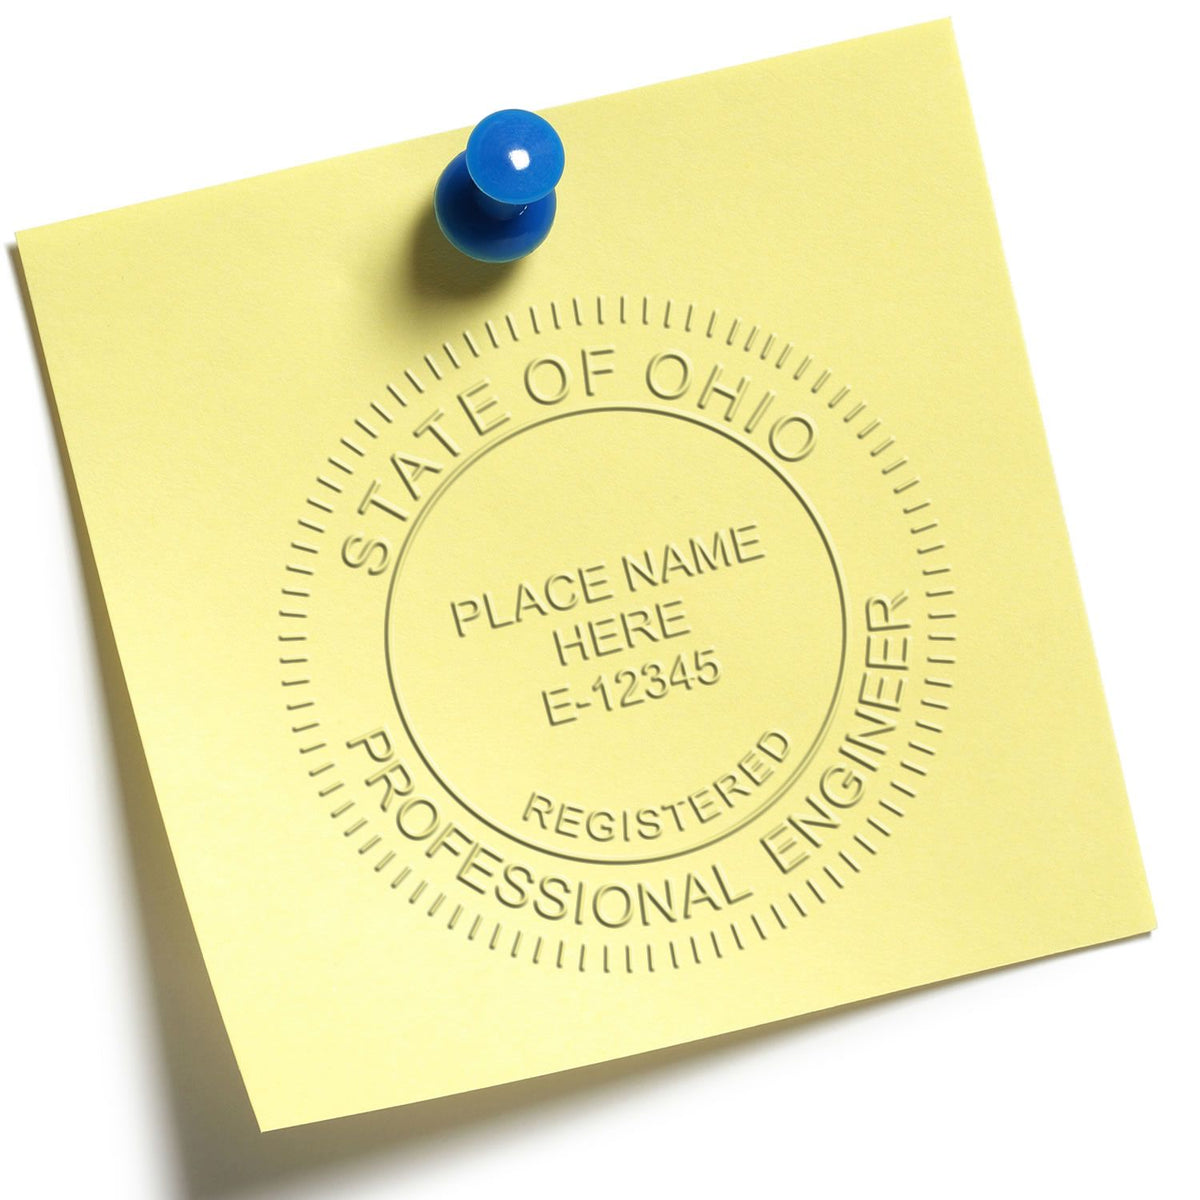 This paper is stamped with a sample imprint of the Ohio Engineer Desk Seal, signifying its quality and reliability.